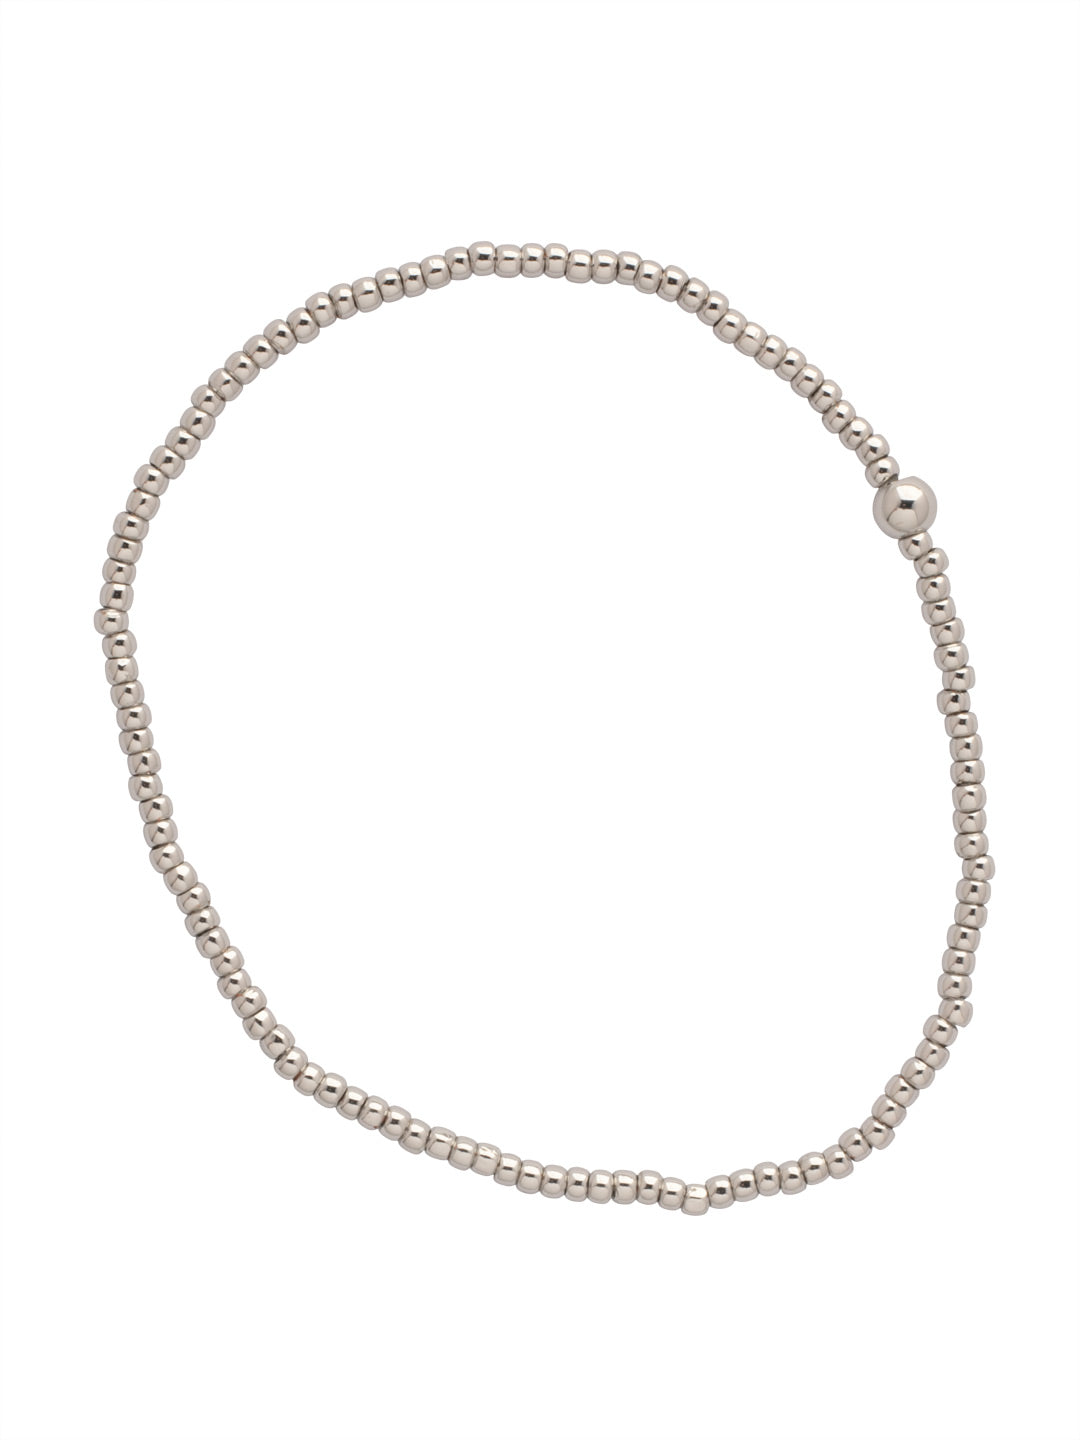 Zuri Stretch Bracelet - BFN30PDMTL - <p>The Zuri Stretch Bracelet features mini repeating metal beads on a multi-layered stretchy jewelry filament, creating a durable and trendy piece. From Sorrelli's Bare Metallic collection in our Palladium finish.</p>